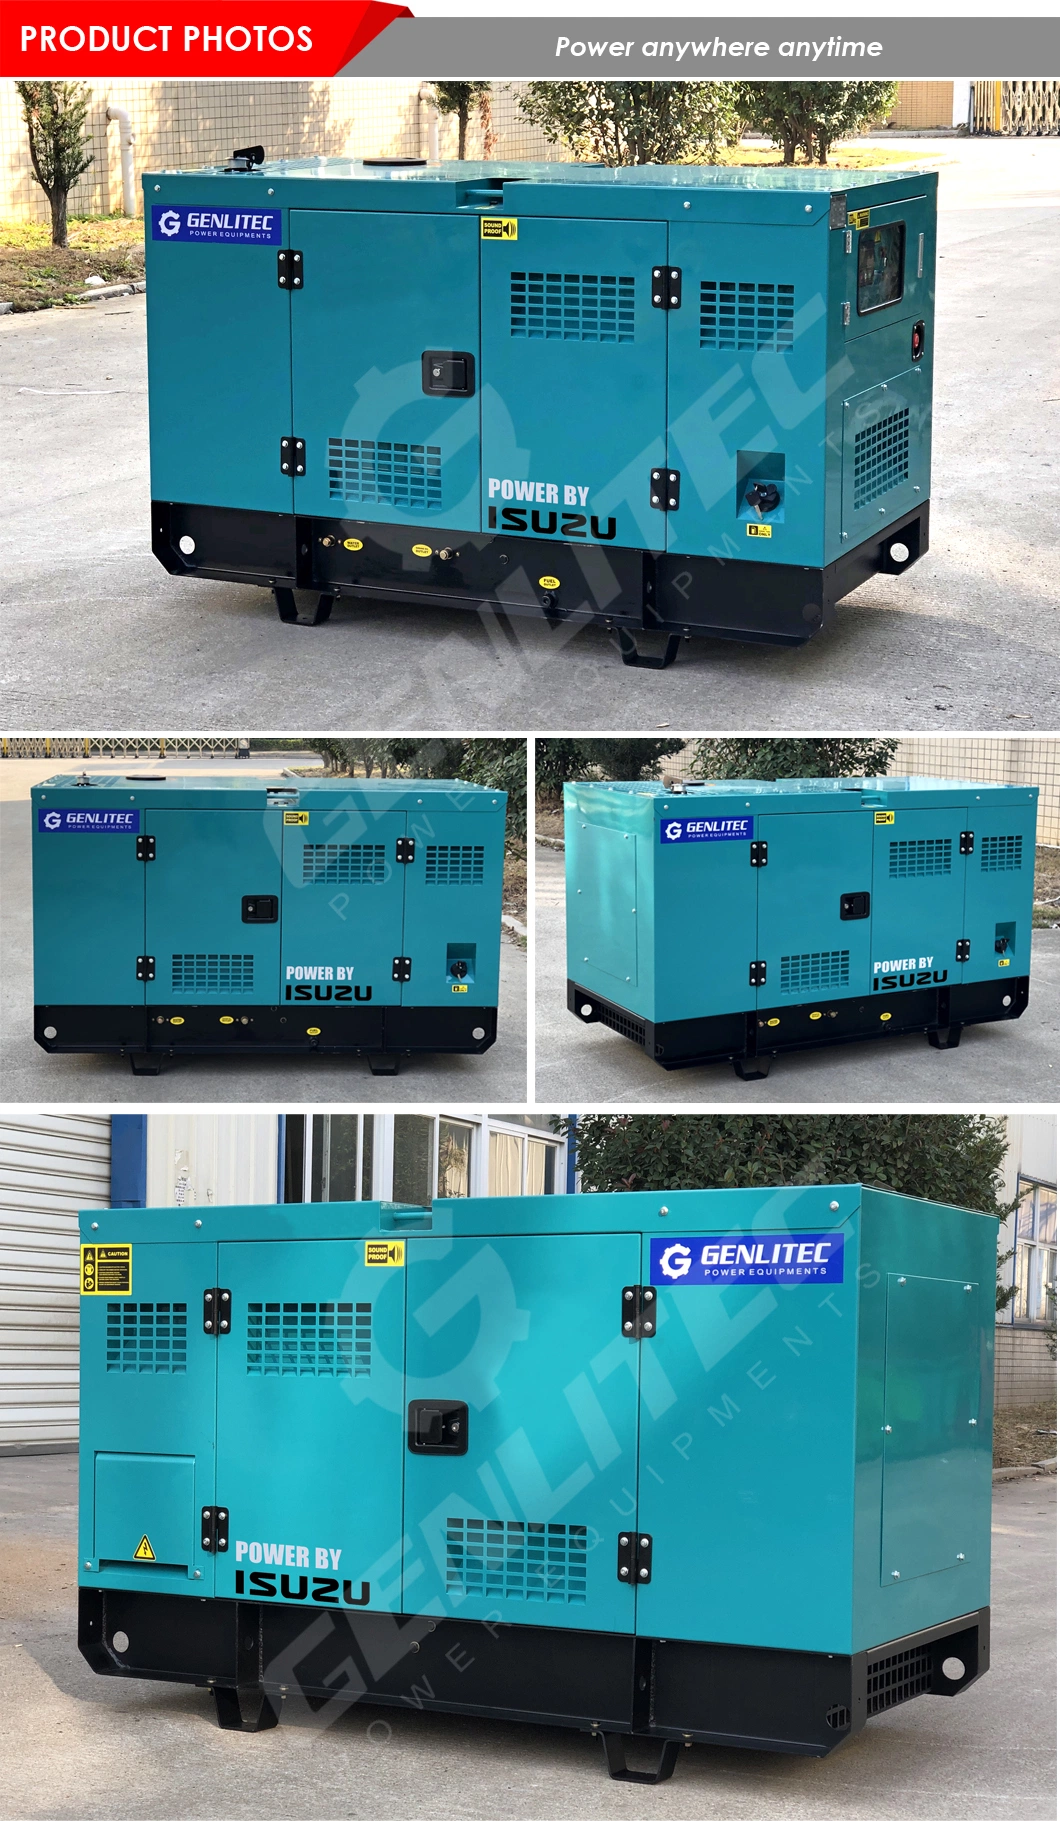 Single/Three Phase Portable Super Silent Home Generator 10kVA 12kVA 15kVA 20kVA 25kVA 30kVA Kubota Yanmar Isuzu Small Diesel Generator